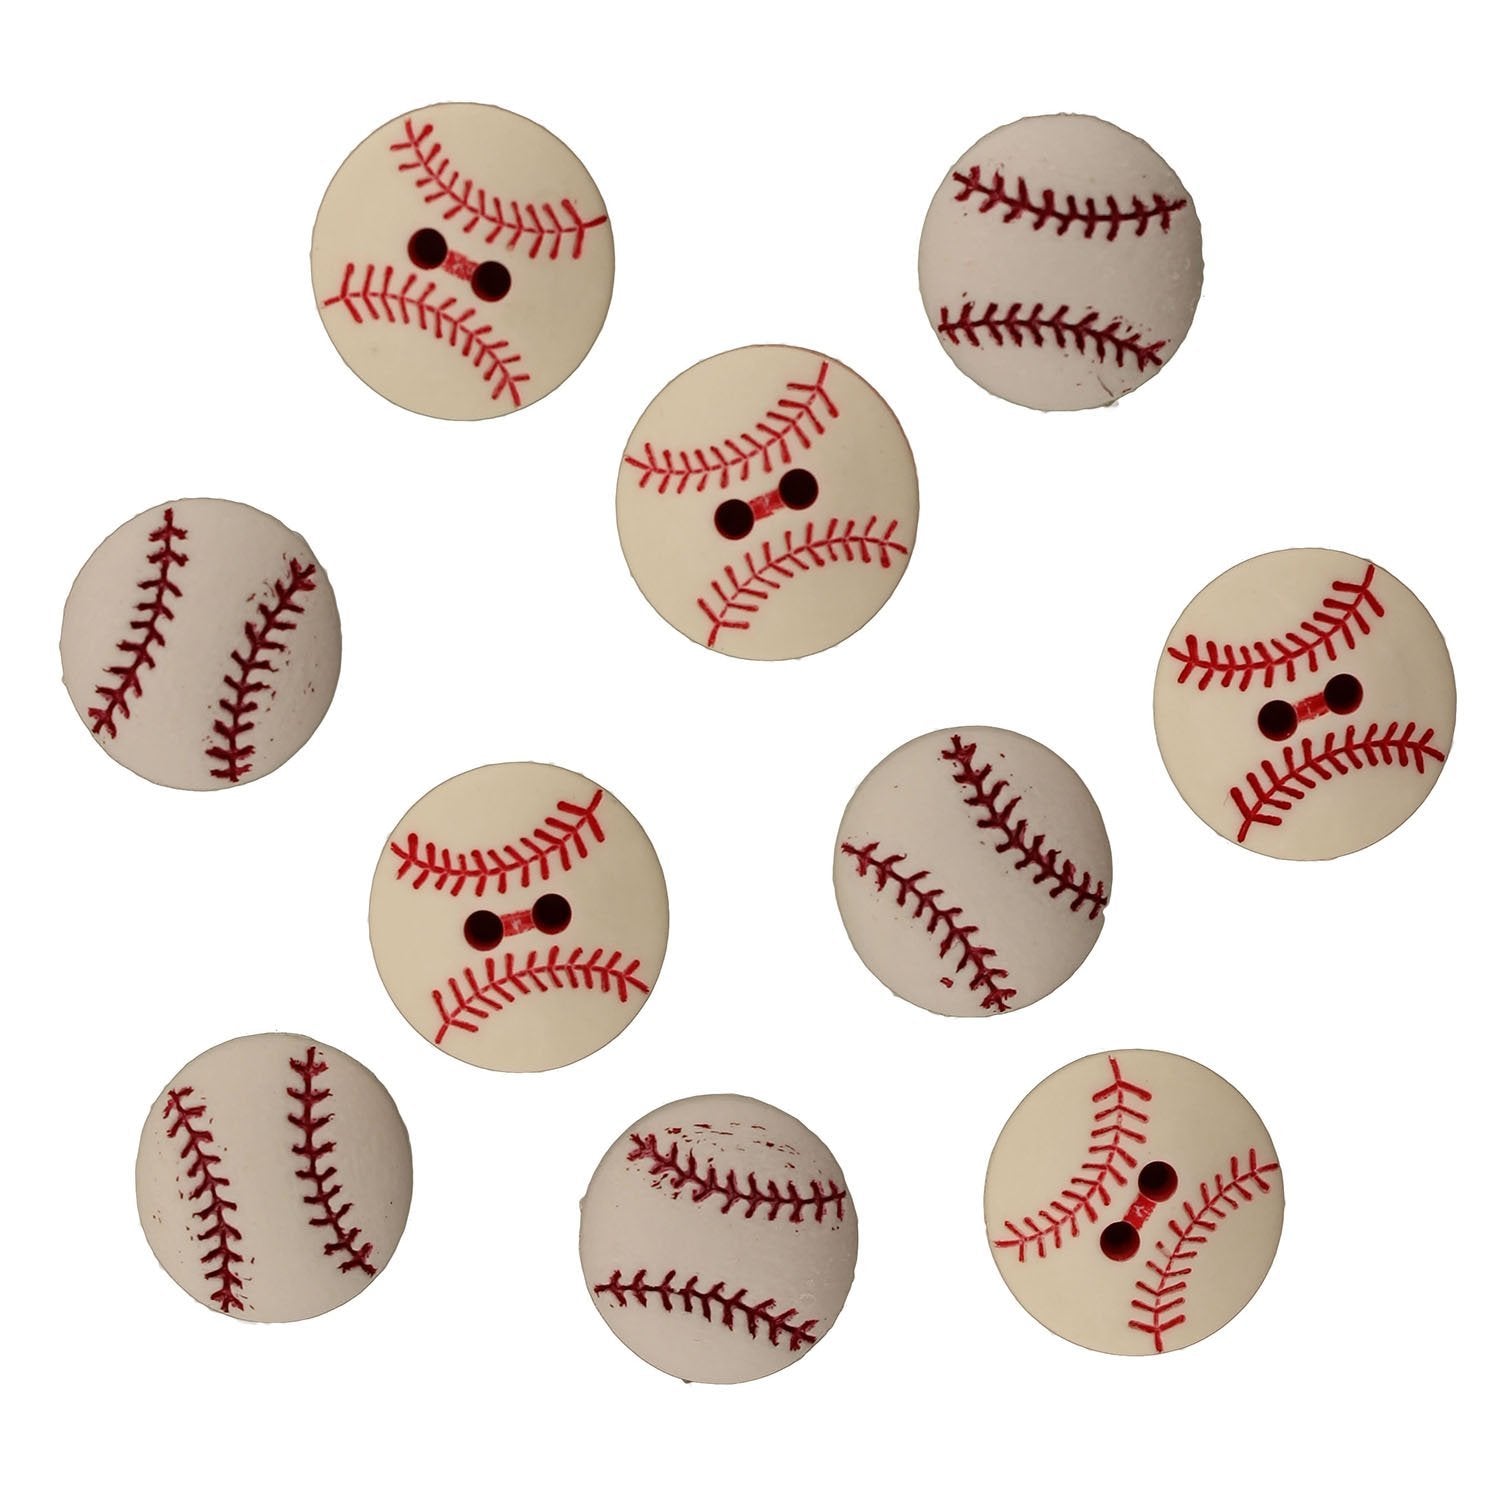 Baseballs-4072 - Buttons Galore and More